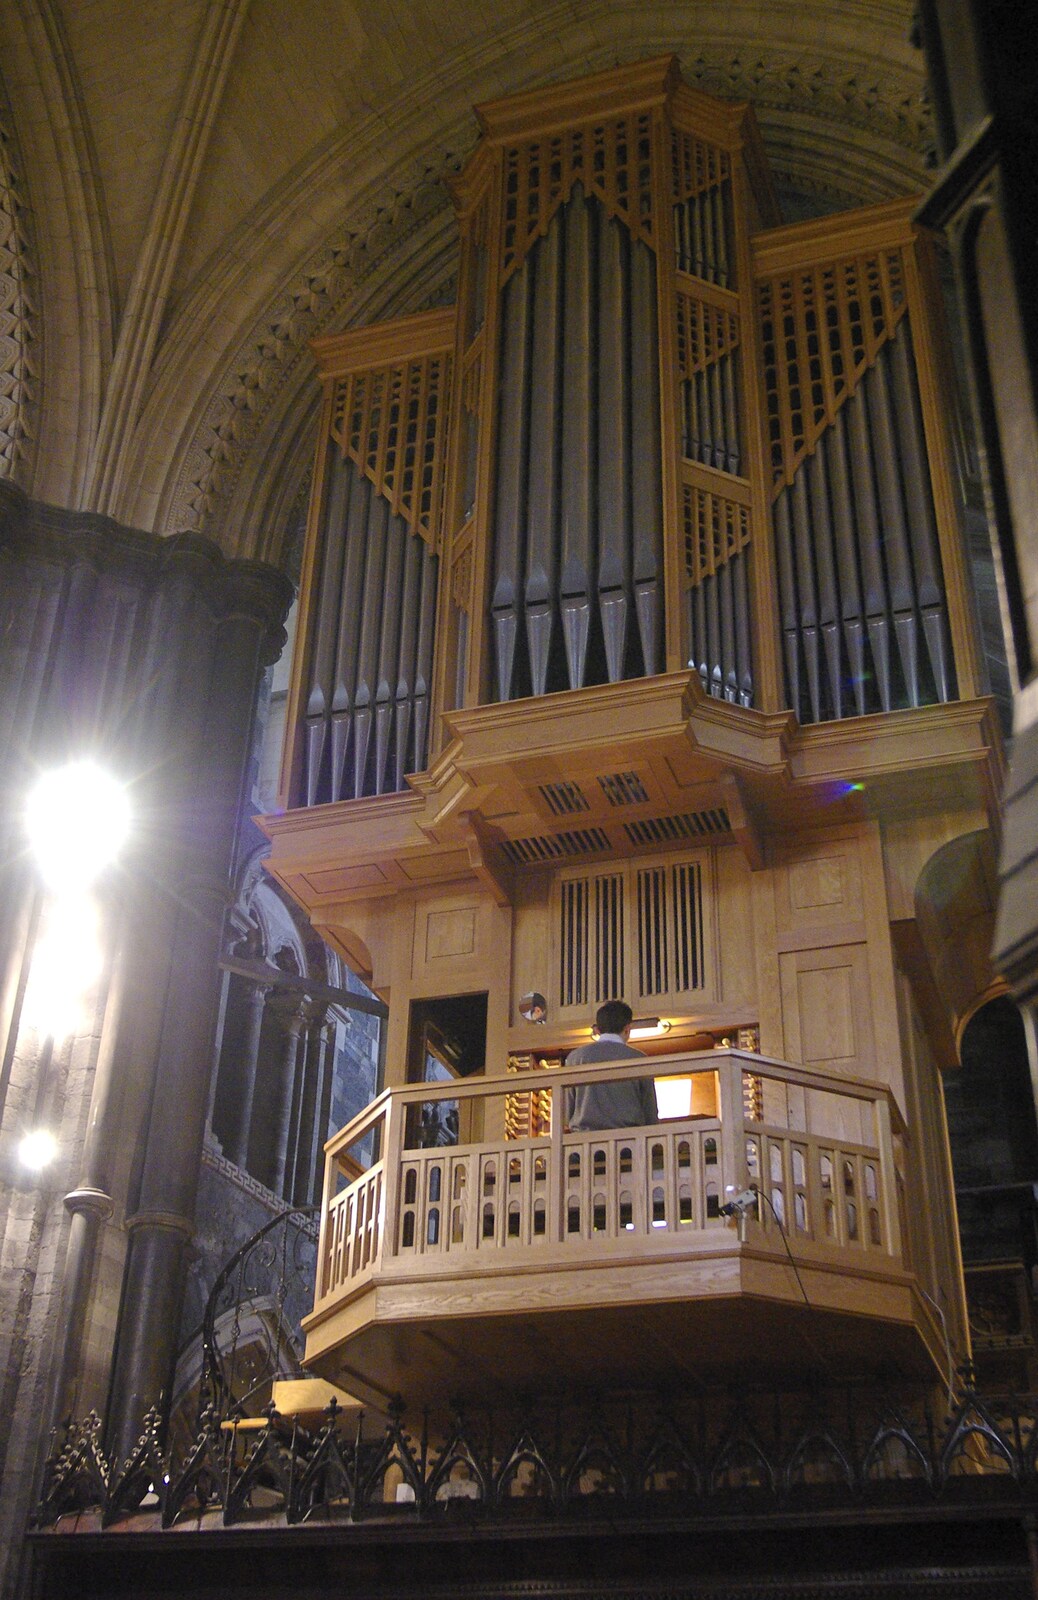 Blackrock and Dublin, Ireland - 24th September 2007: The organ is being played